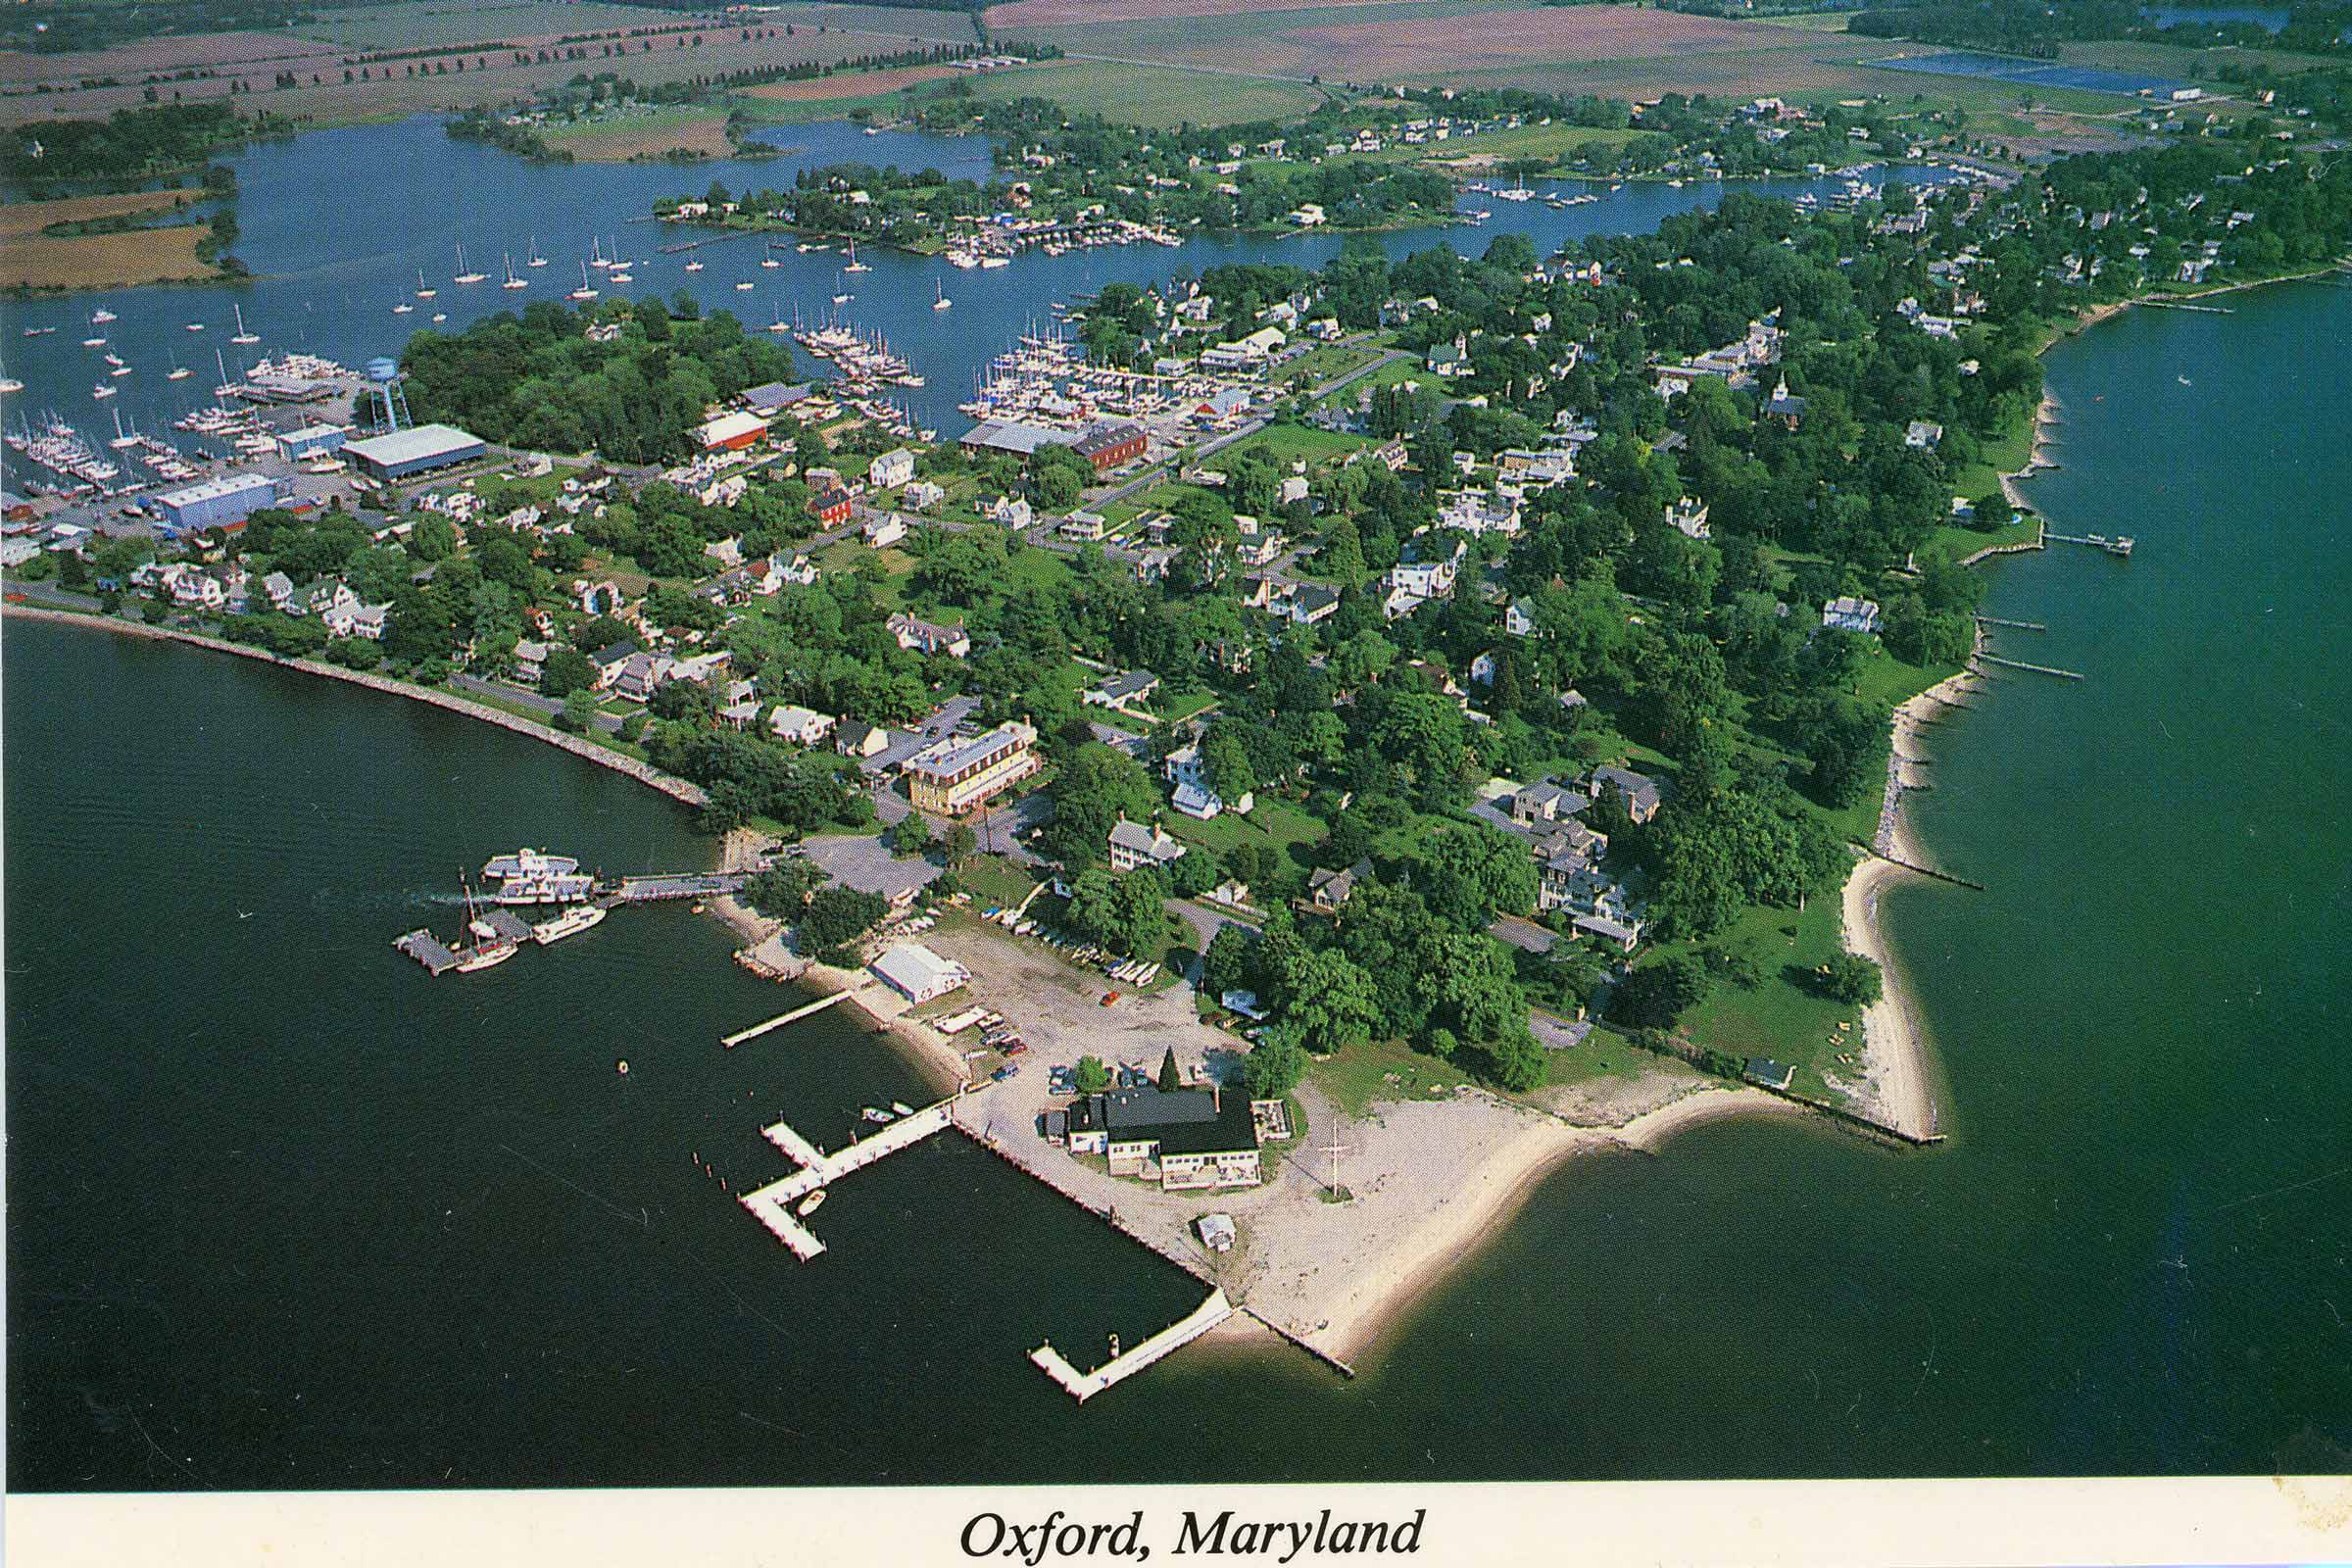 Aerial photo of Oxford, MD showing all of the town and beaches.